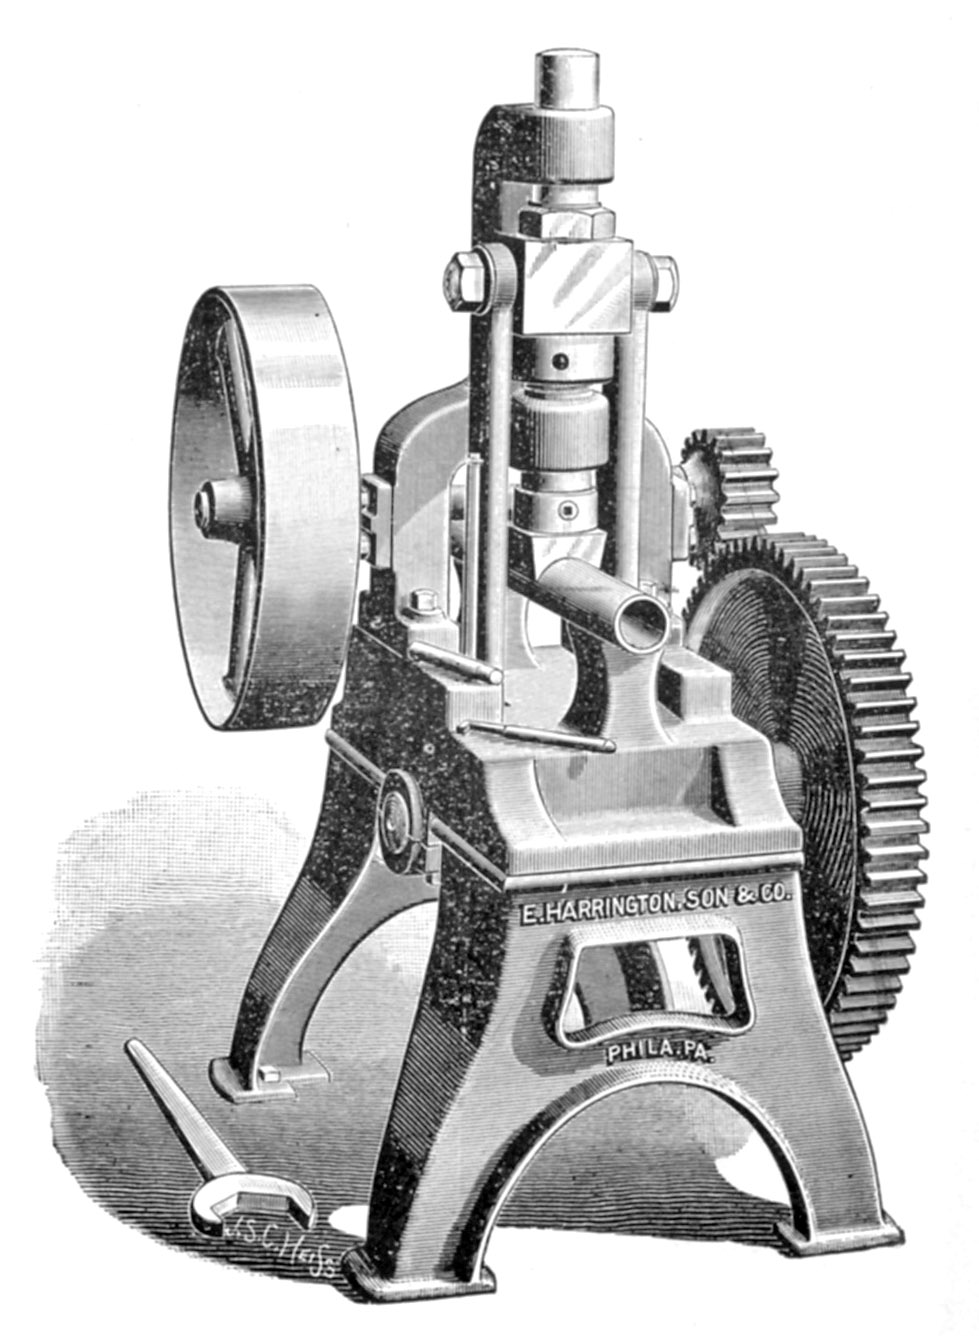 Edwin Harrington Pipe Straightener, pages 115-116